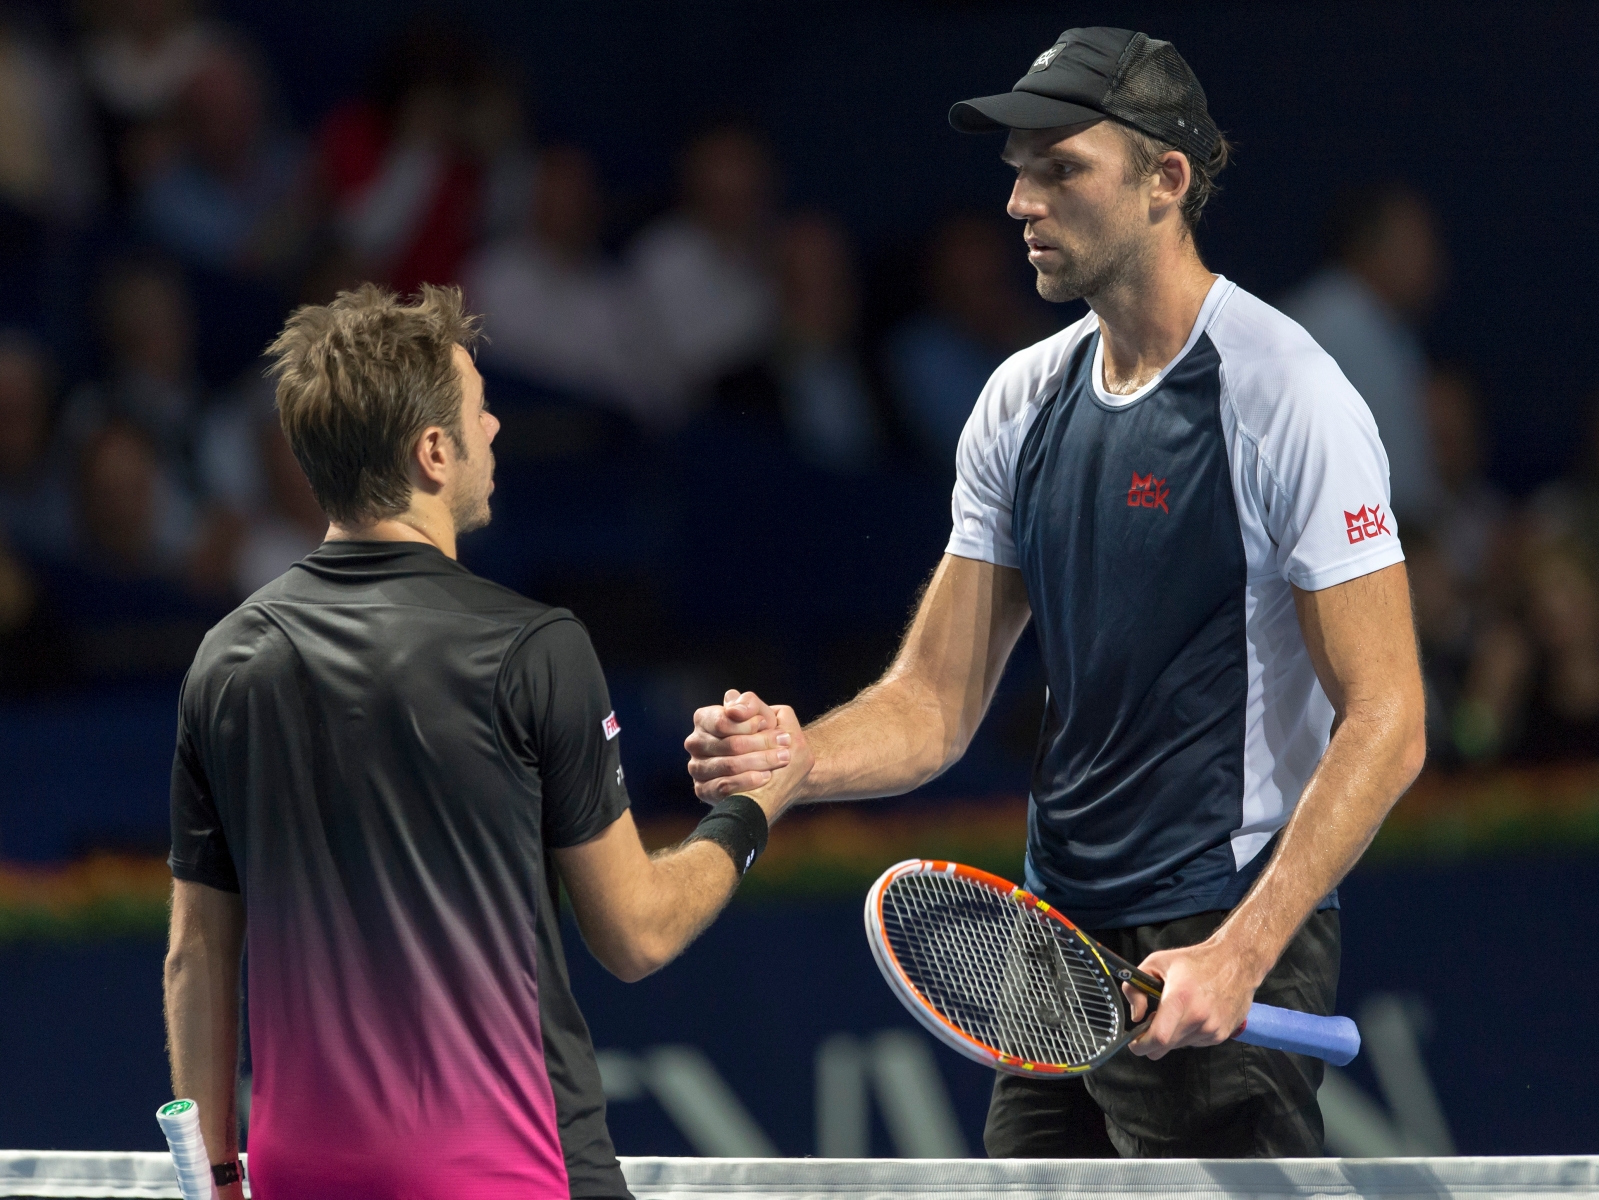 Switzerland's Stan Wawrinka, left, congratulates Croatia's Ivo Karlovic, right, after their first round match at the Swiss Indoors tennis tournament at the St. Jakobshalle in Basel, Switzerland, on Wednesday, October 28, 2015. (KEYSTONE/Georgios Kefalas) SWITZERLAND TENNIS SWISS INDOORS